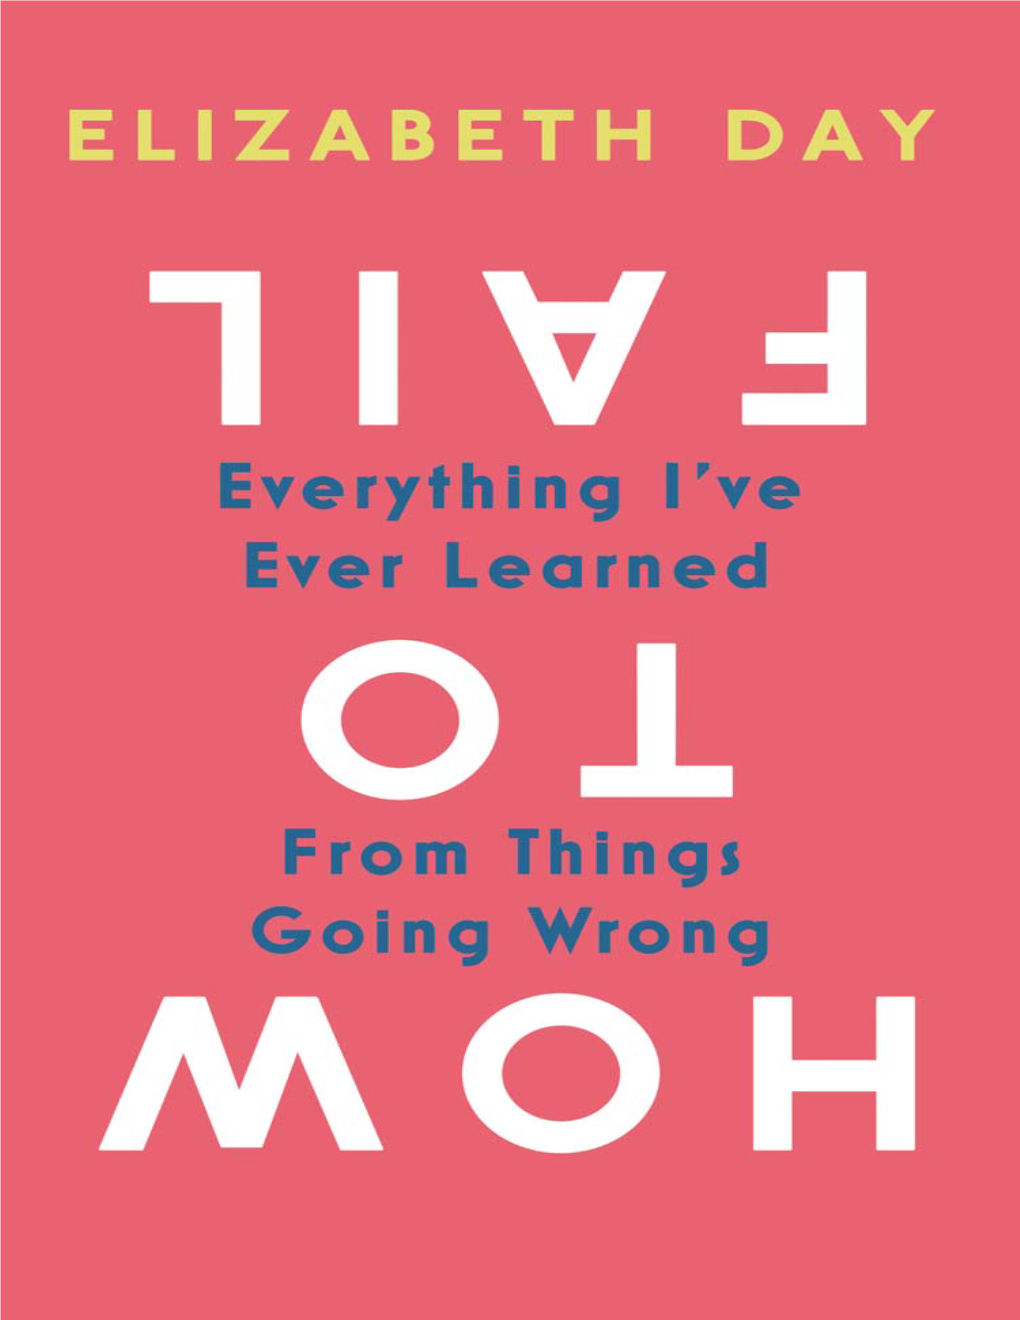 How to Fail with Elizabeth Day Podcast